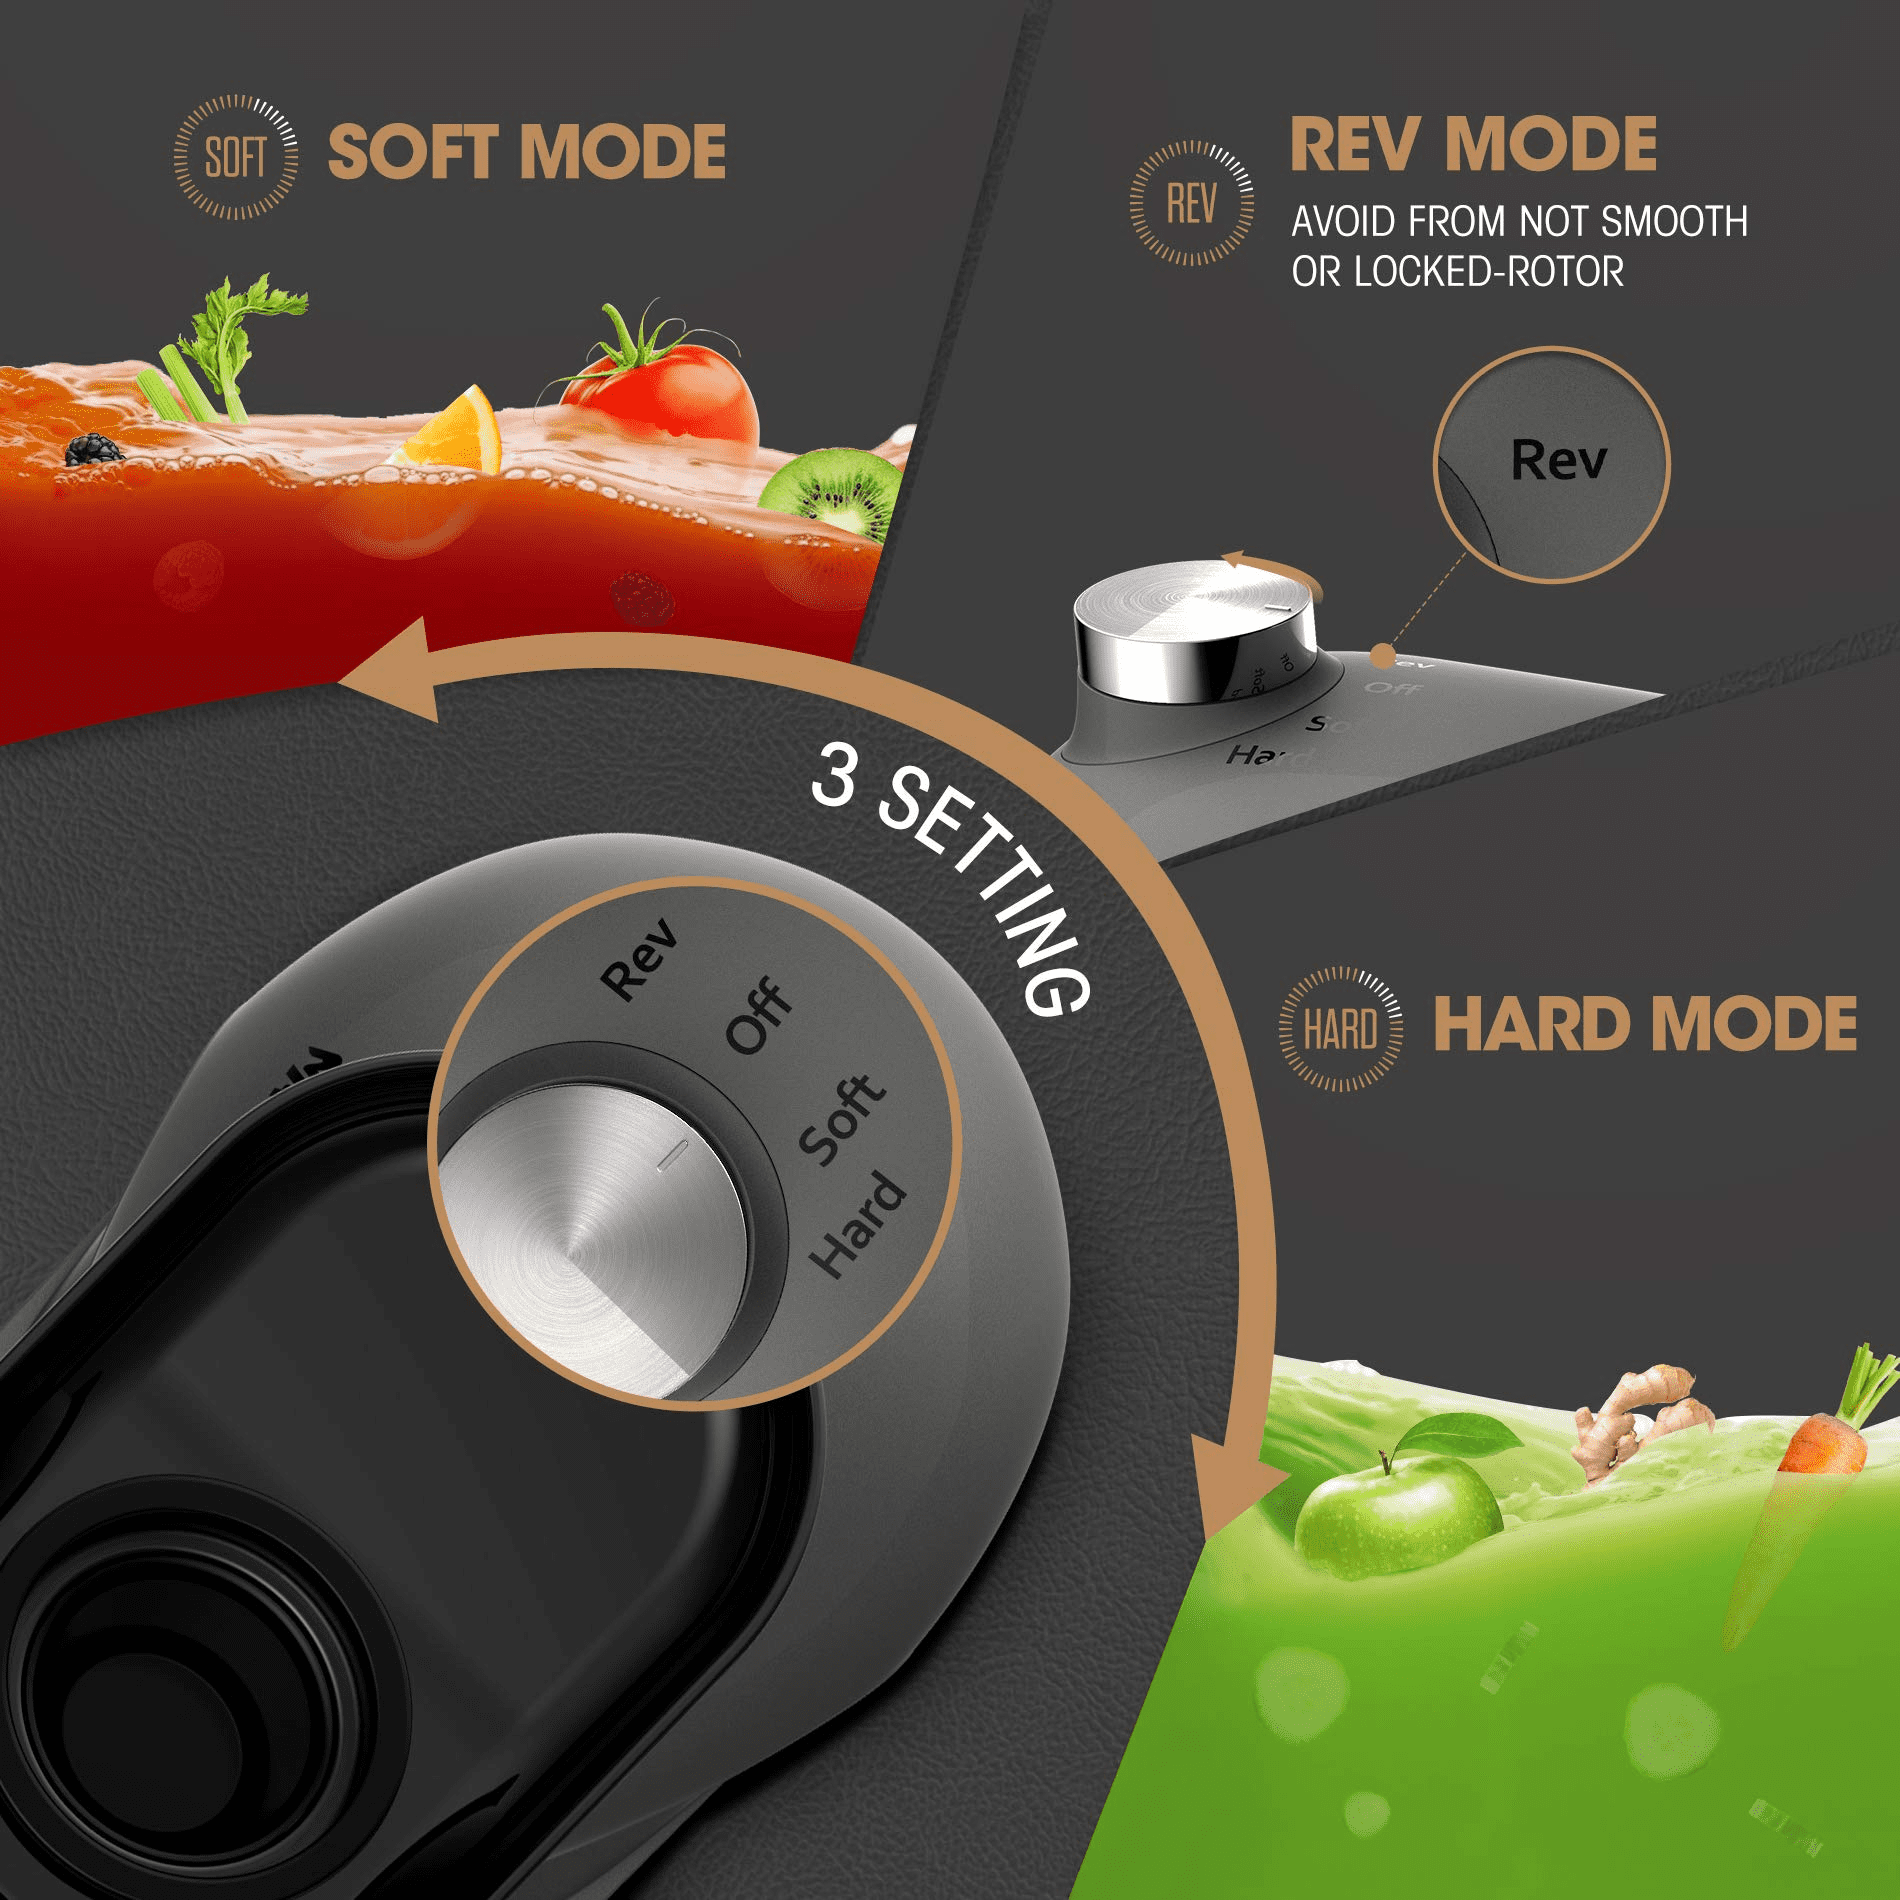  Touch LED Display Masticating Juicer Machines Vegetable and  Fruit, Healnitor Cold Press Slow Juice Extractor Machines with Triple Mode,  Easy to Clean Brush & Quiet Motor, 500ML Travel Bottle, Black 